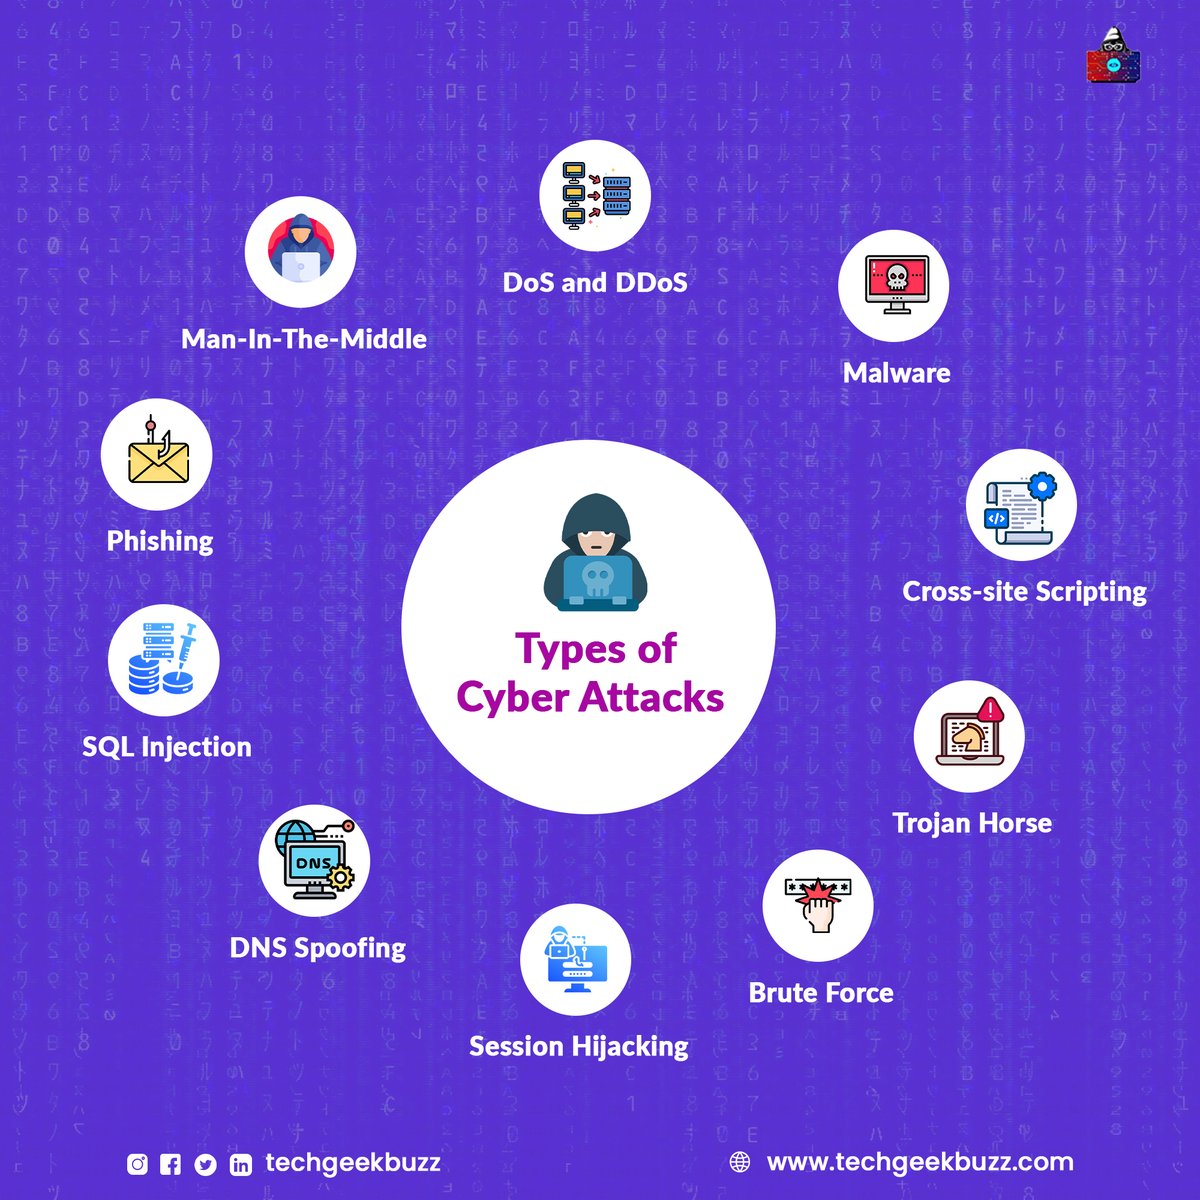 As technology advances, the prevalence of online threats increases. Get acquainted with different types of cyber attacks your devices 💻 📲 can fall prey to, resulting in the loss of sensitive data.

#cyberattacks #onlinethreats #malware #mitm #ddosattacks #phishing #bruteforce